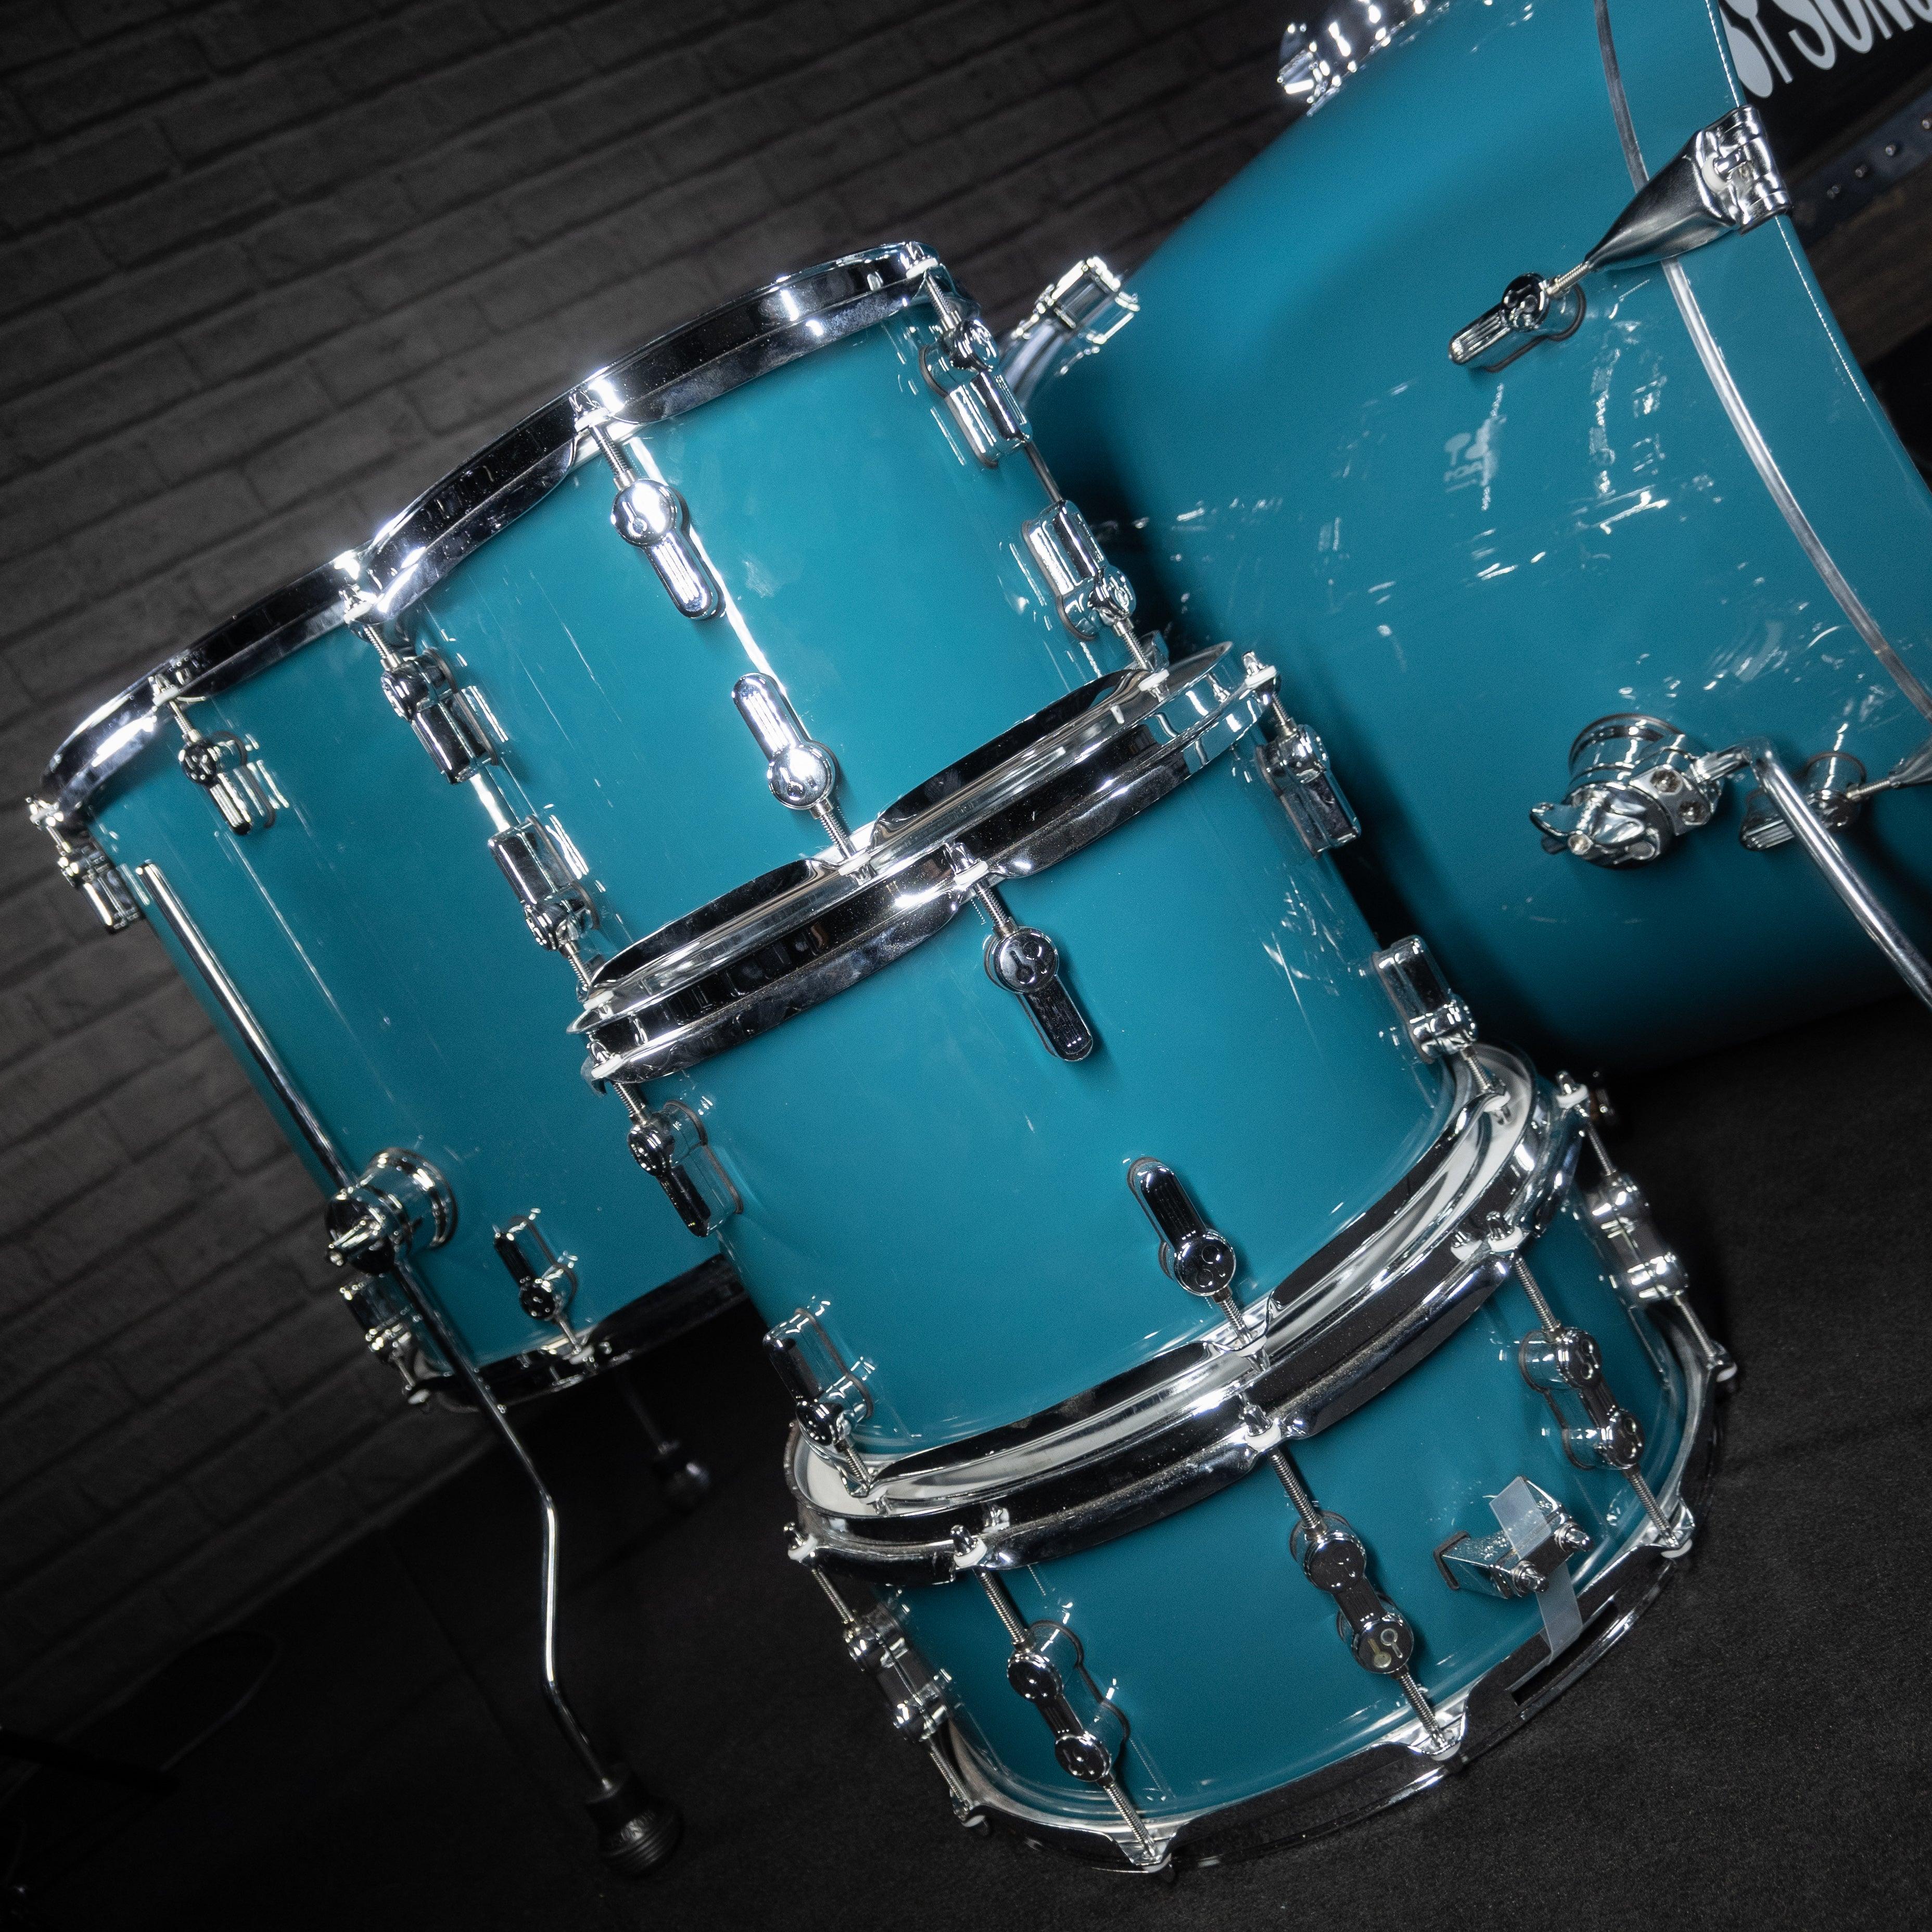 Sonor AQ1 Stage 5 Piece Drum Kit with Hardware (Caribbean Blue) USED - Impulse Music Co.